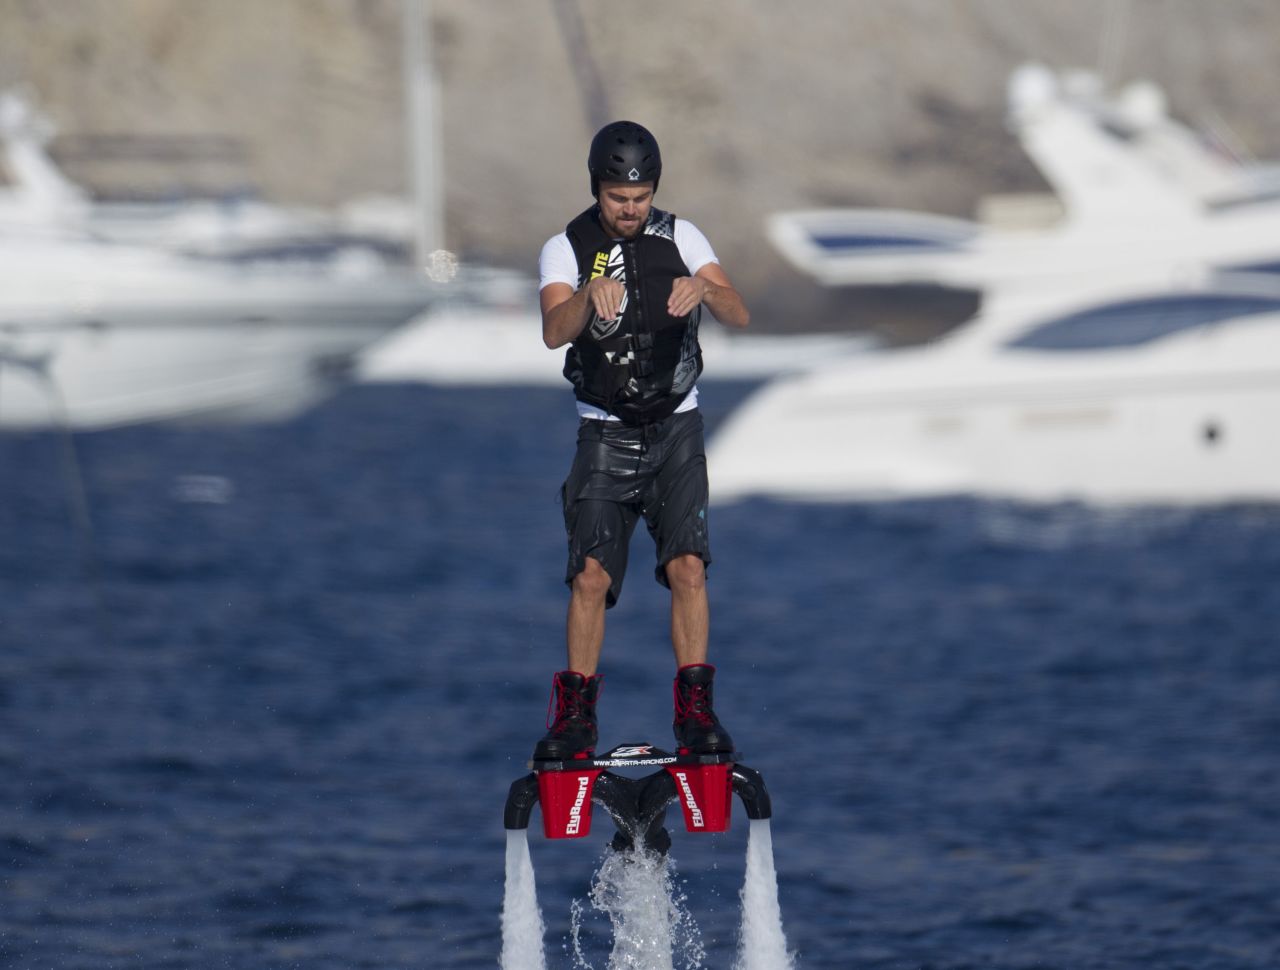 After "The Great Gatsby" did just OK, the best place to find Leonardo DiCaprio this summer was on vacation. The actor traipsed off to Ibiza, Spain, where he donned a jetpack and went flyboarding.